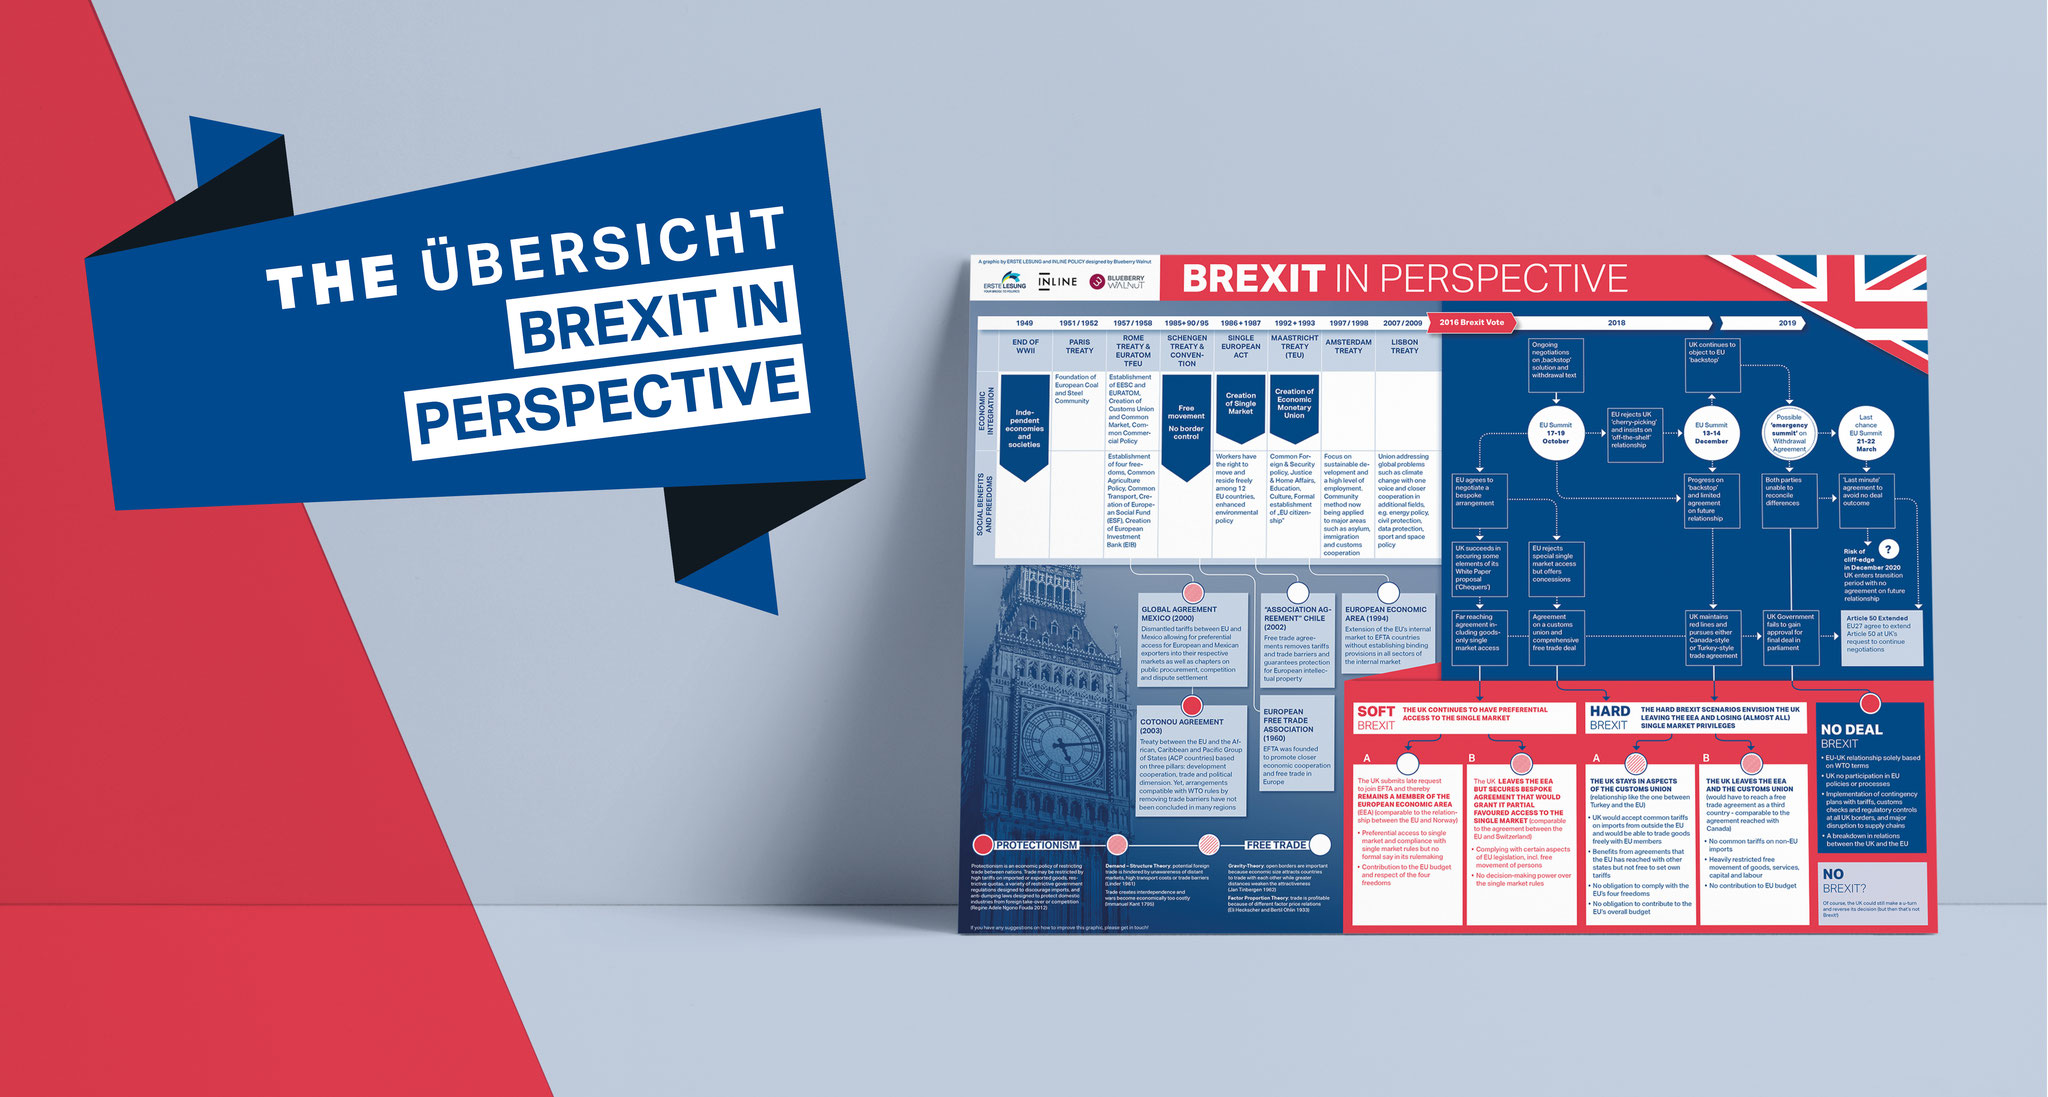 Download: Brexit in perspective